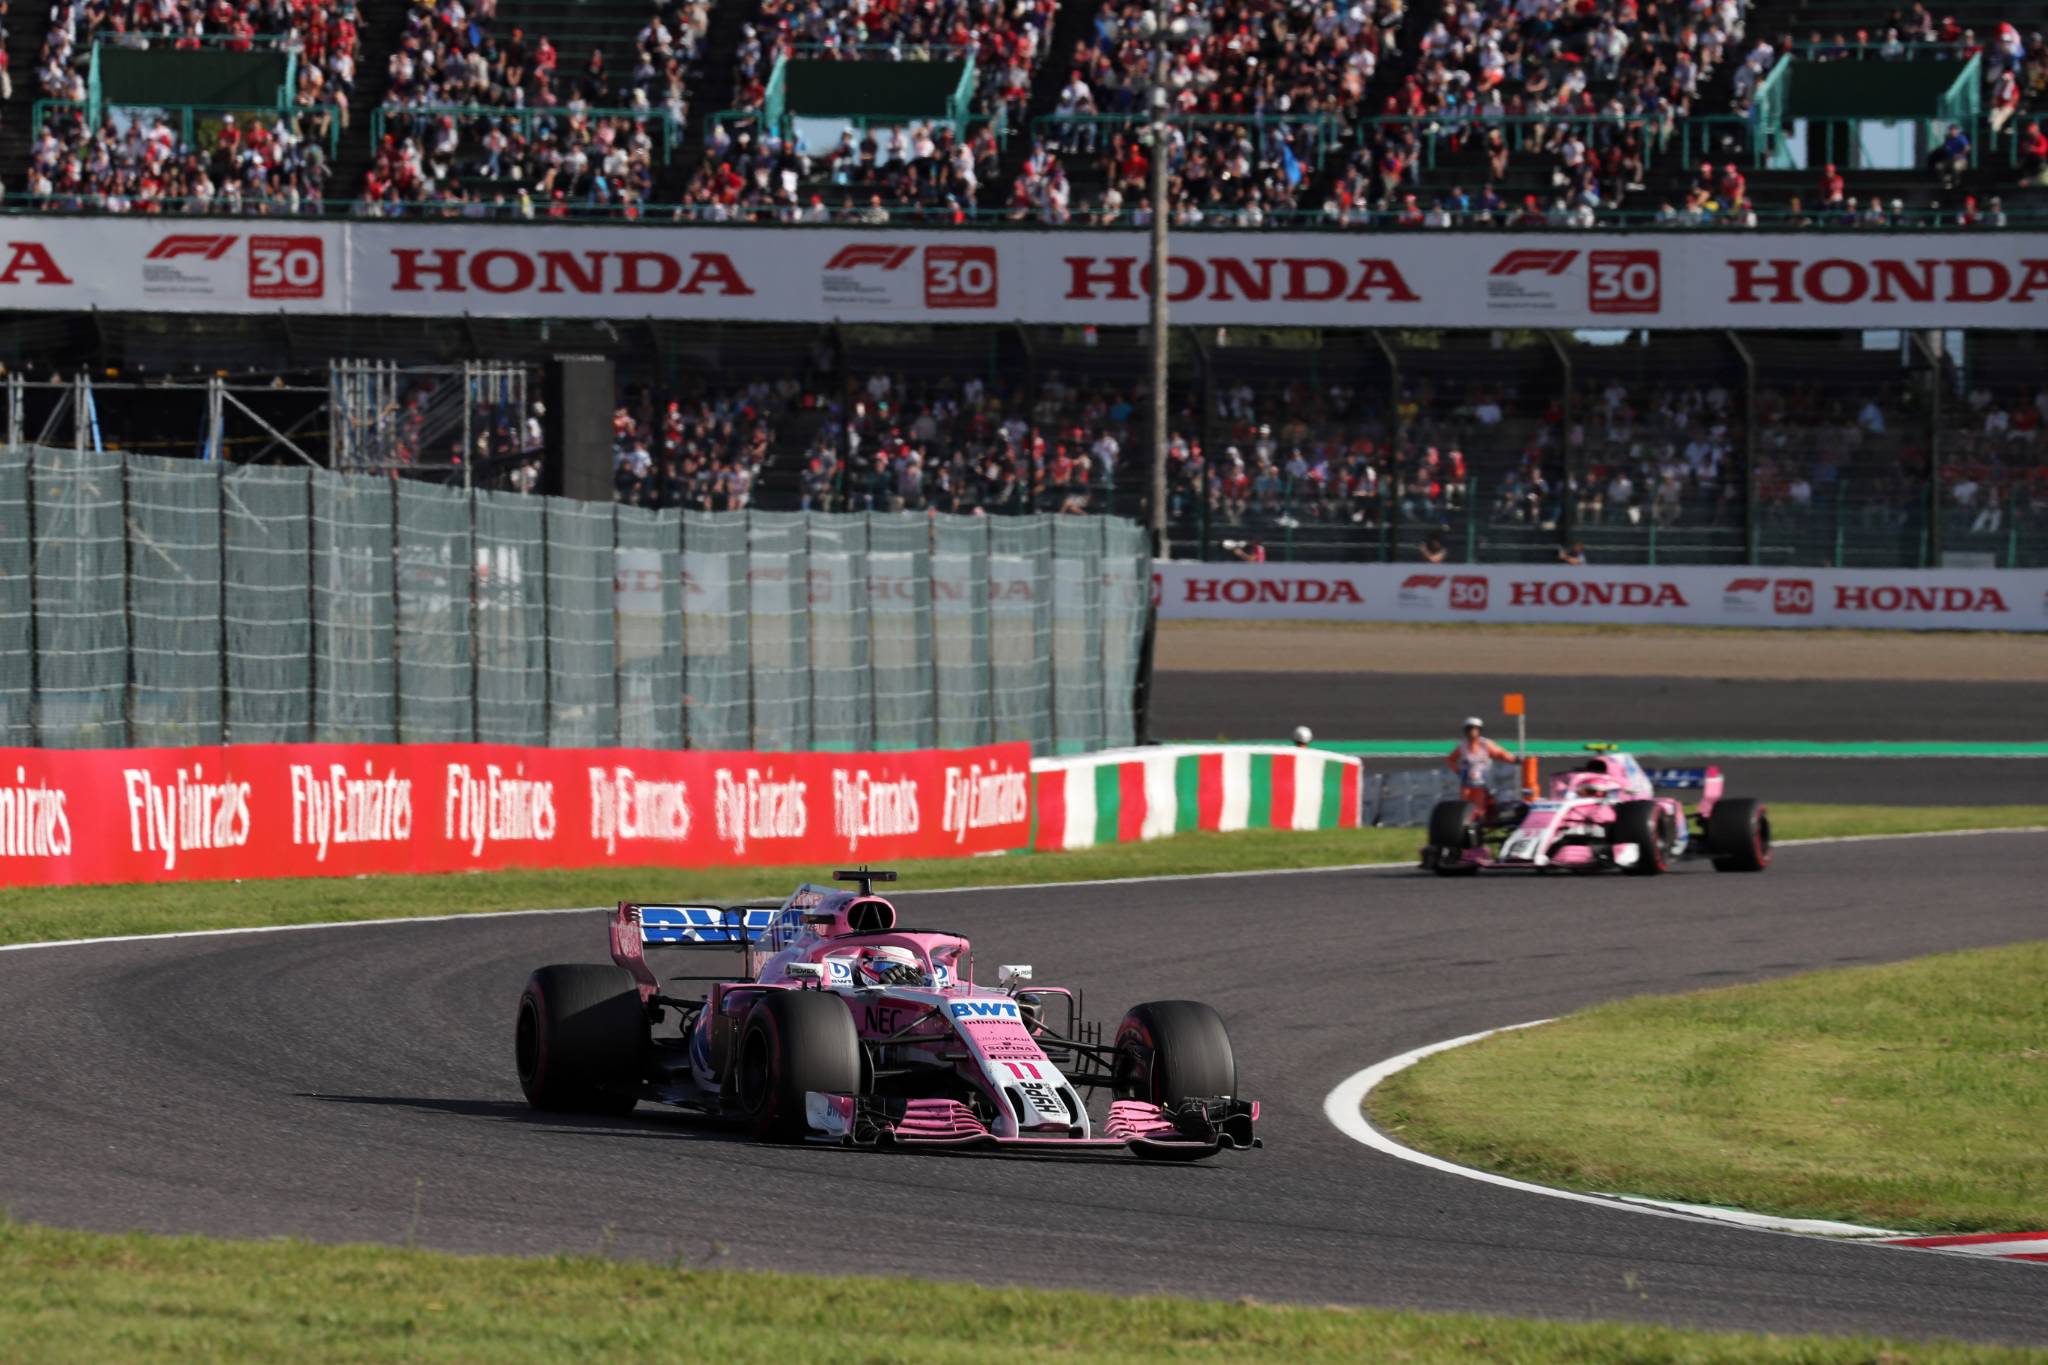 07.10.2018 - Race, Sergio Perez (MEX) Racing Point Force India F1 VJM11 leads Esteban Ocon (FRA) Racing Point Force India F1 VJM11